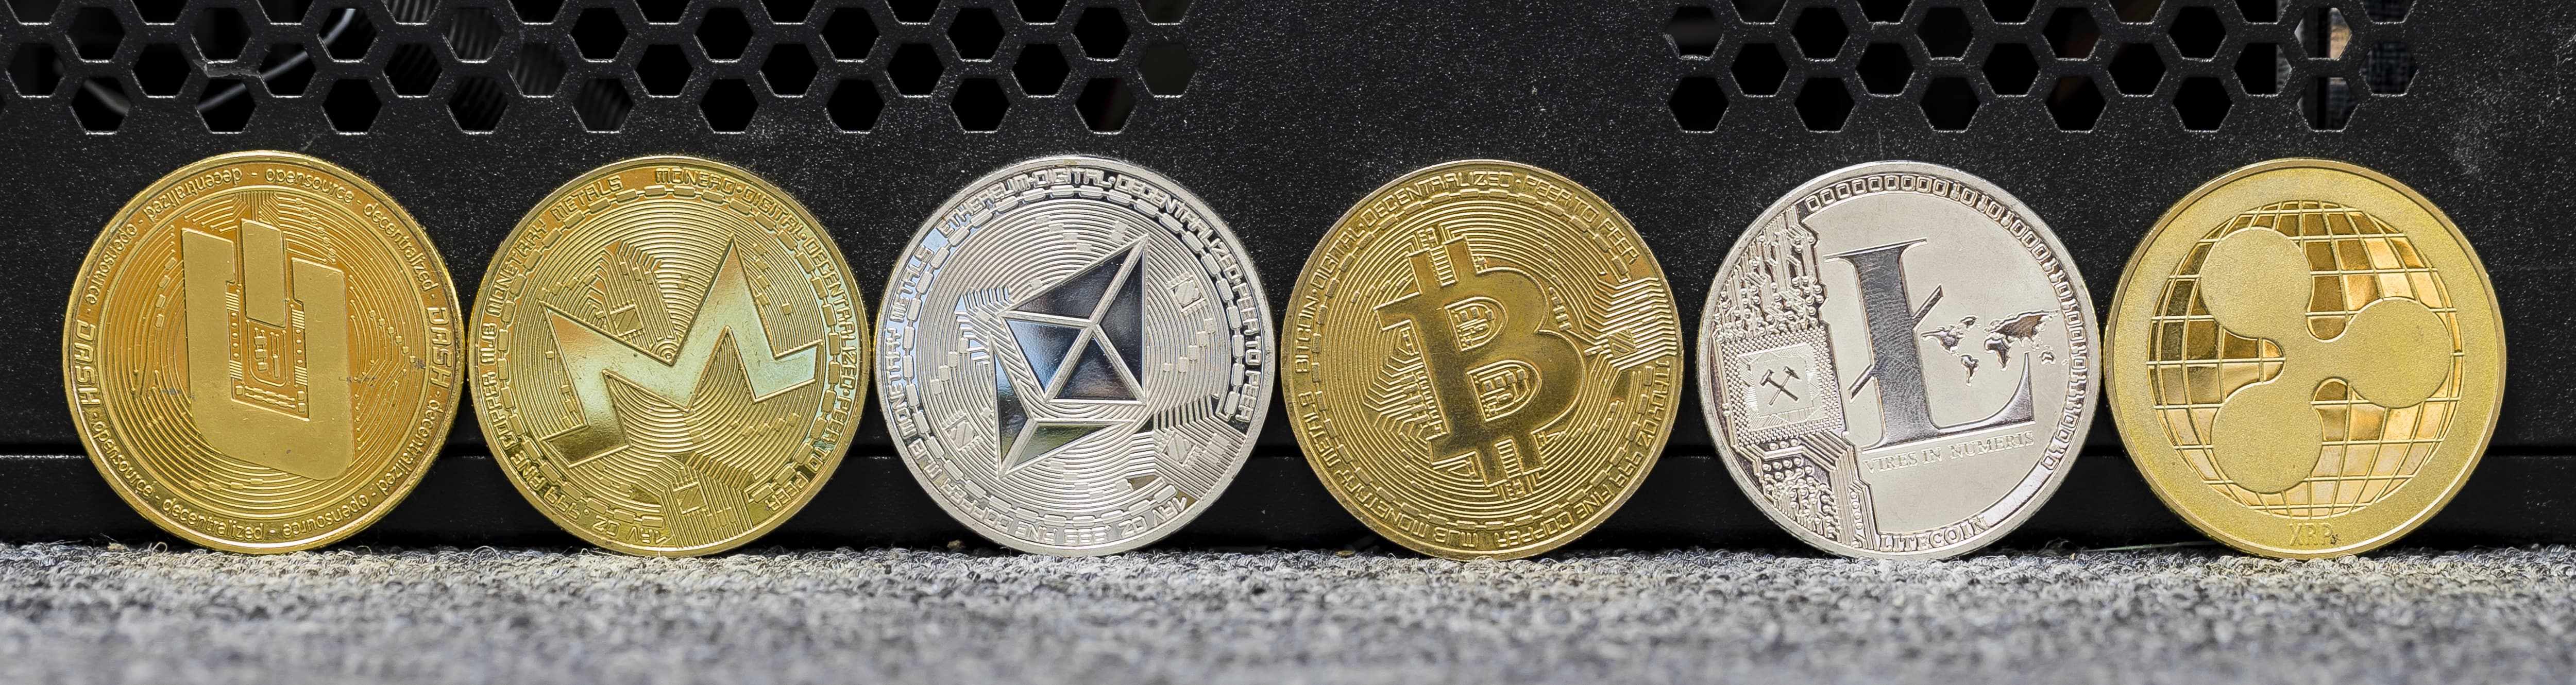 ether,bitcoin,cryptocurrencies,falling,ether